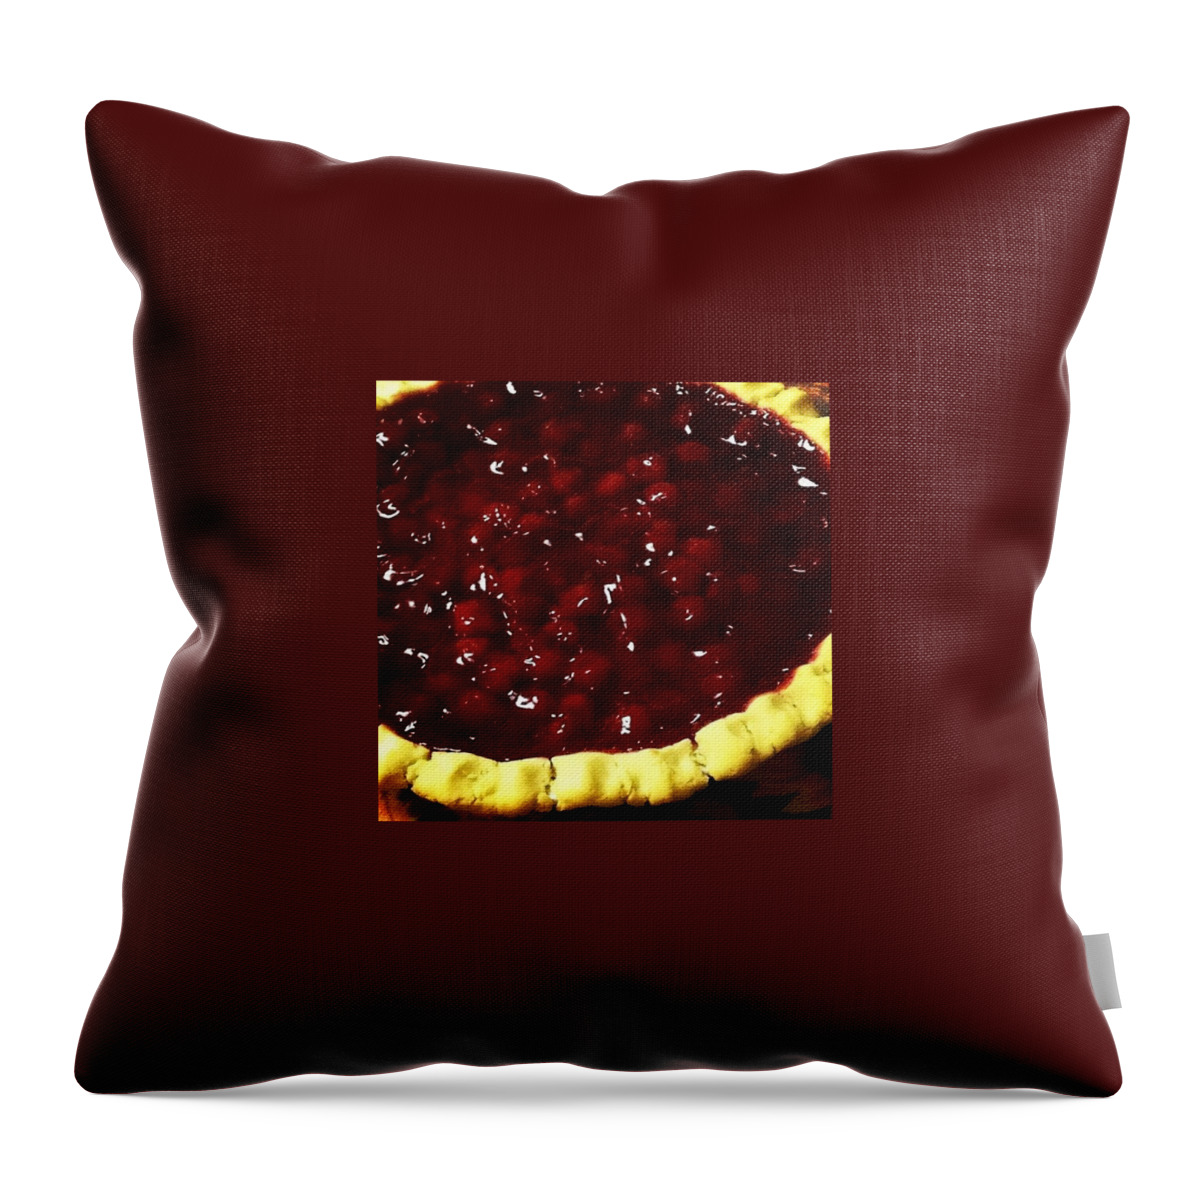  Throw Pillow featuring the photograph Cherry Pie by Frank J Casella